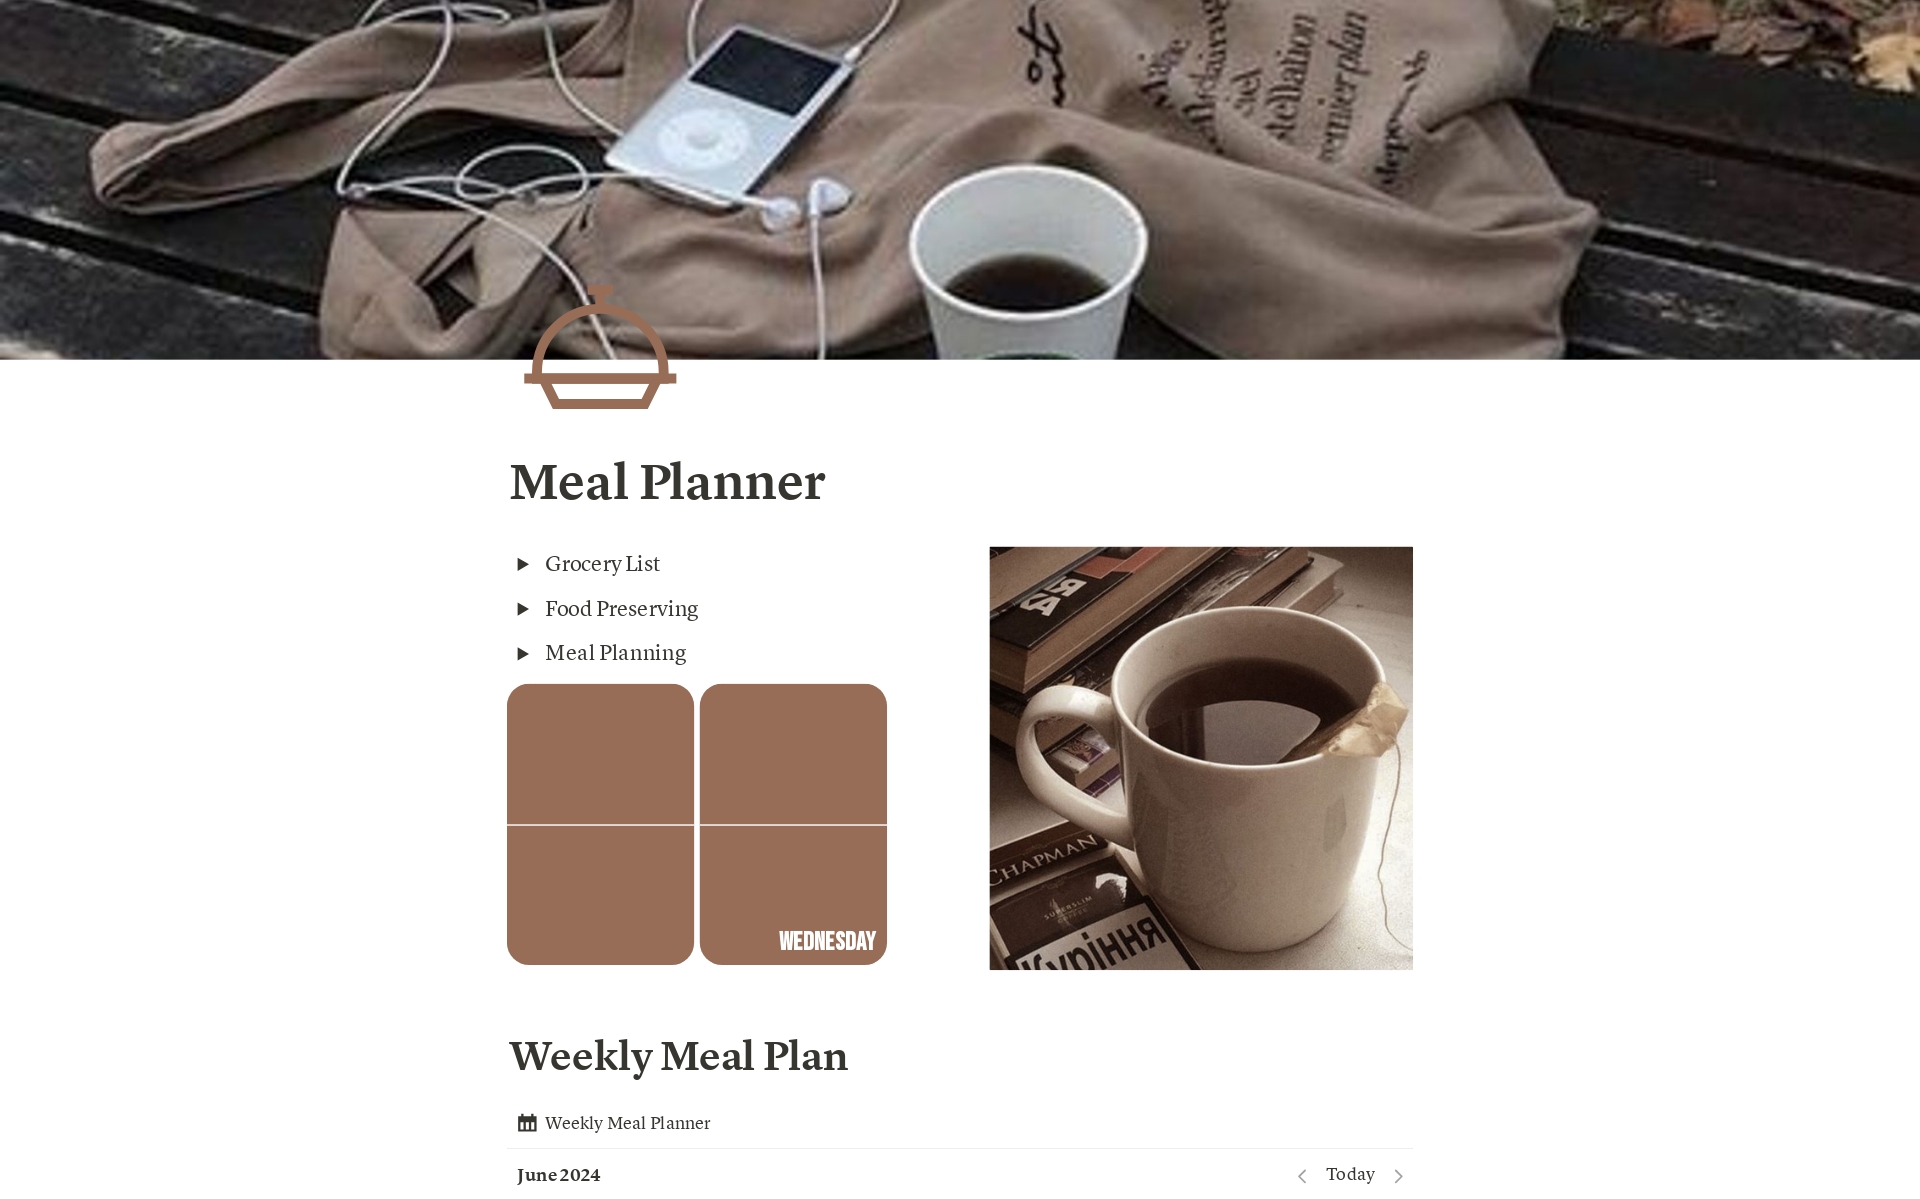 Streamline your meal planning with our versatile template! Easily organize weekly menus, grocery lists, and eat easier. Simplify mealtime prep and stay on track with your dietary goals. Get started today!